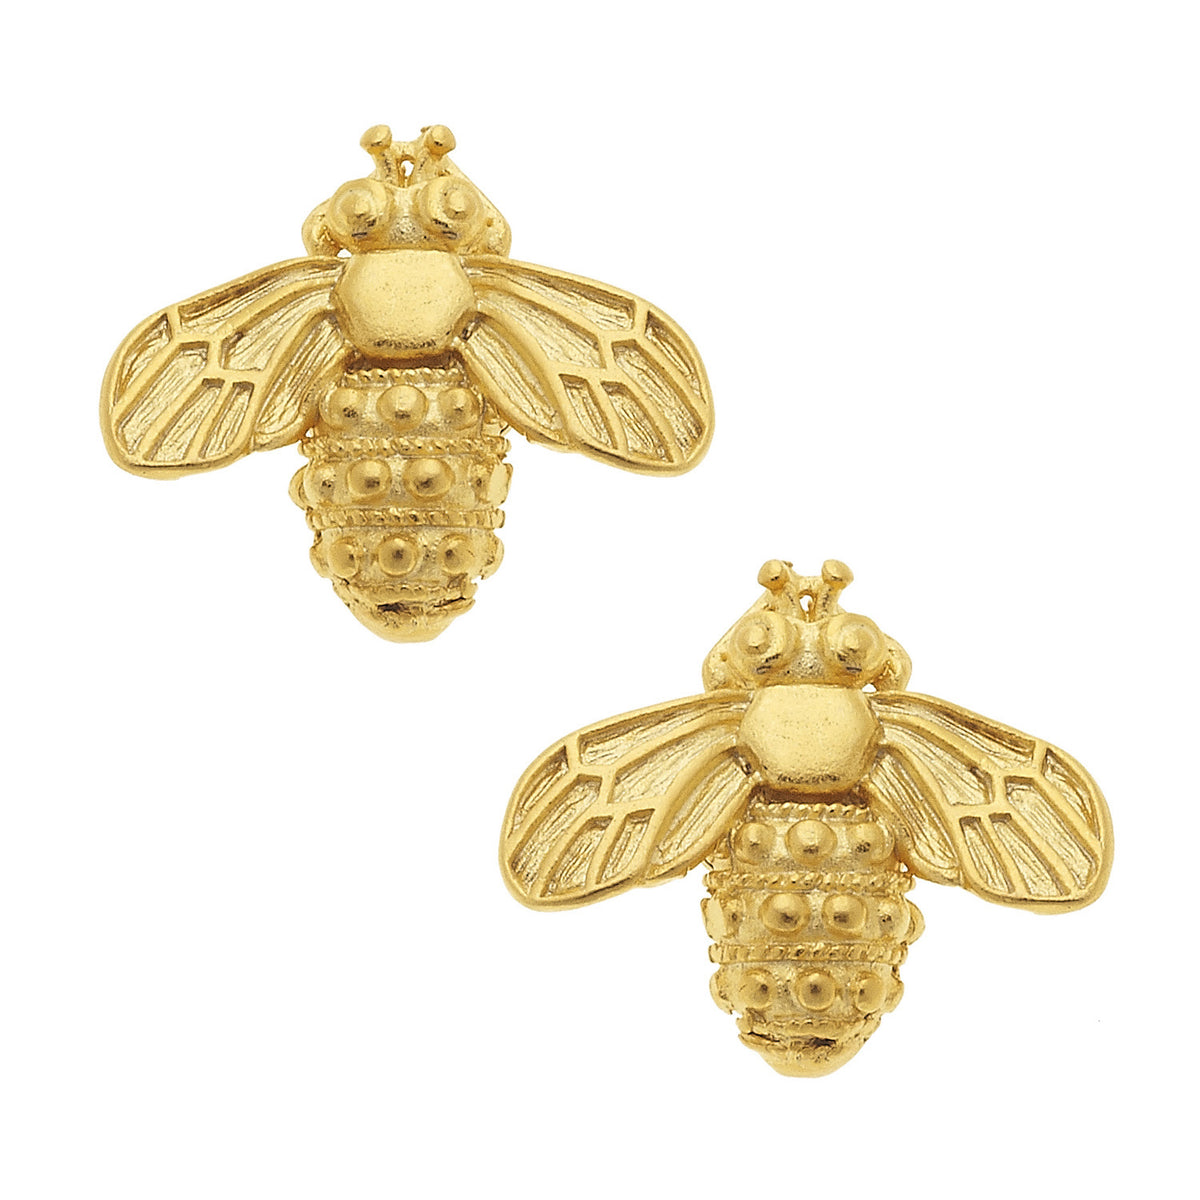 Susan Shaw Bee Stud Earrings, Gold Plated on Post